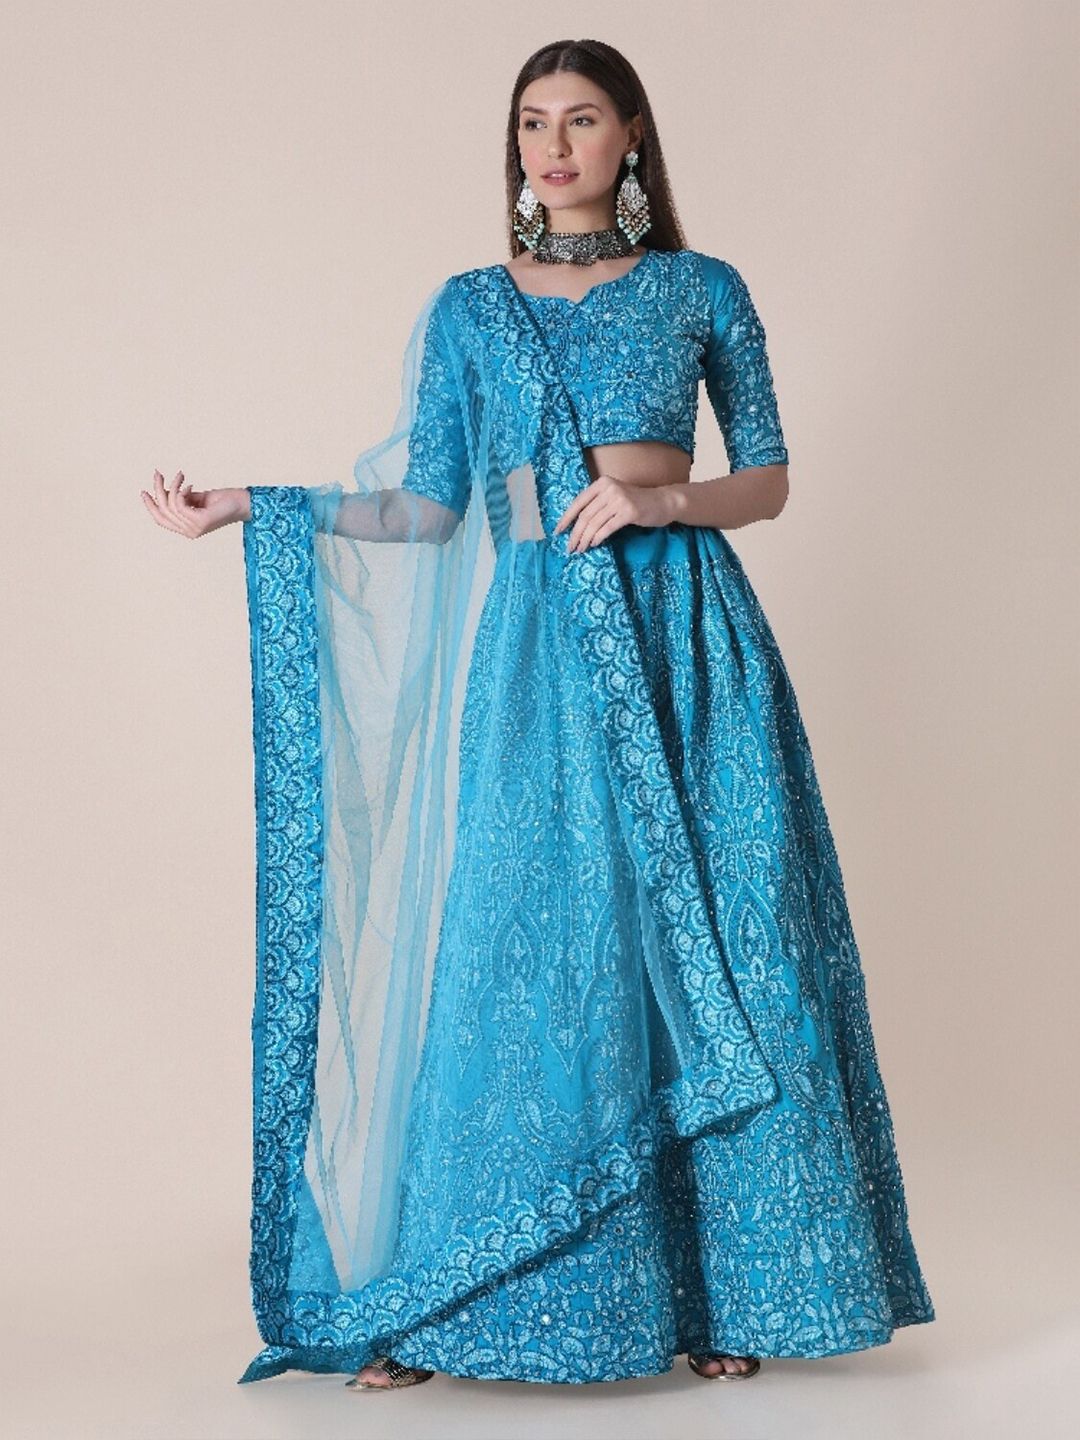 Atsevam Turquoise Blue Embroidered Semi-Stitched Lehenga & Unstitched Blouse With Dupatta Price in India